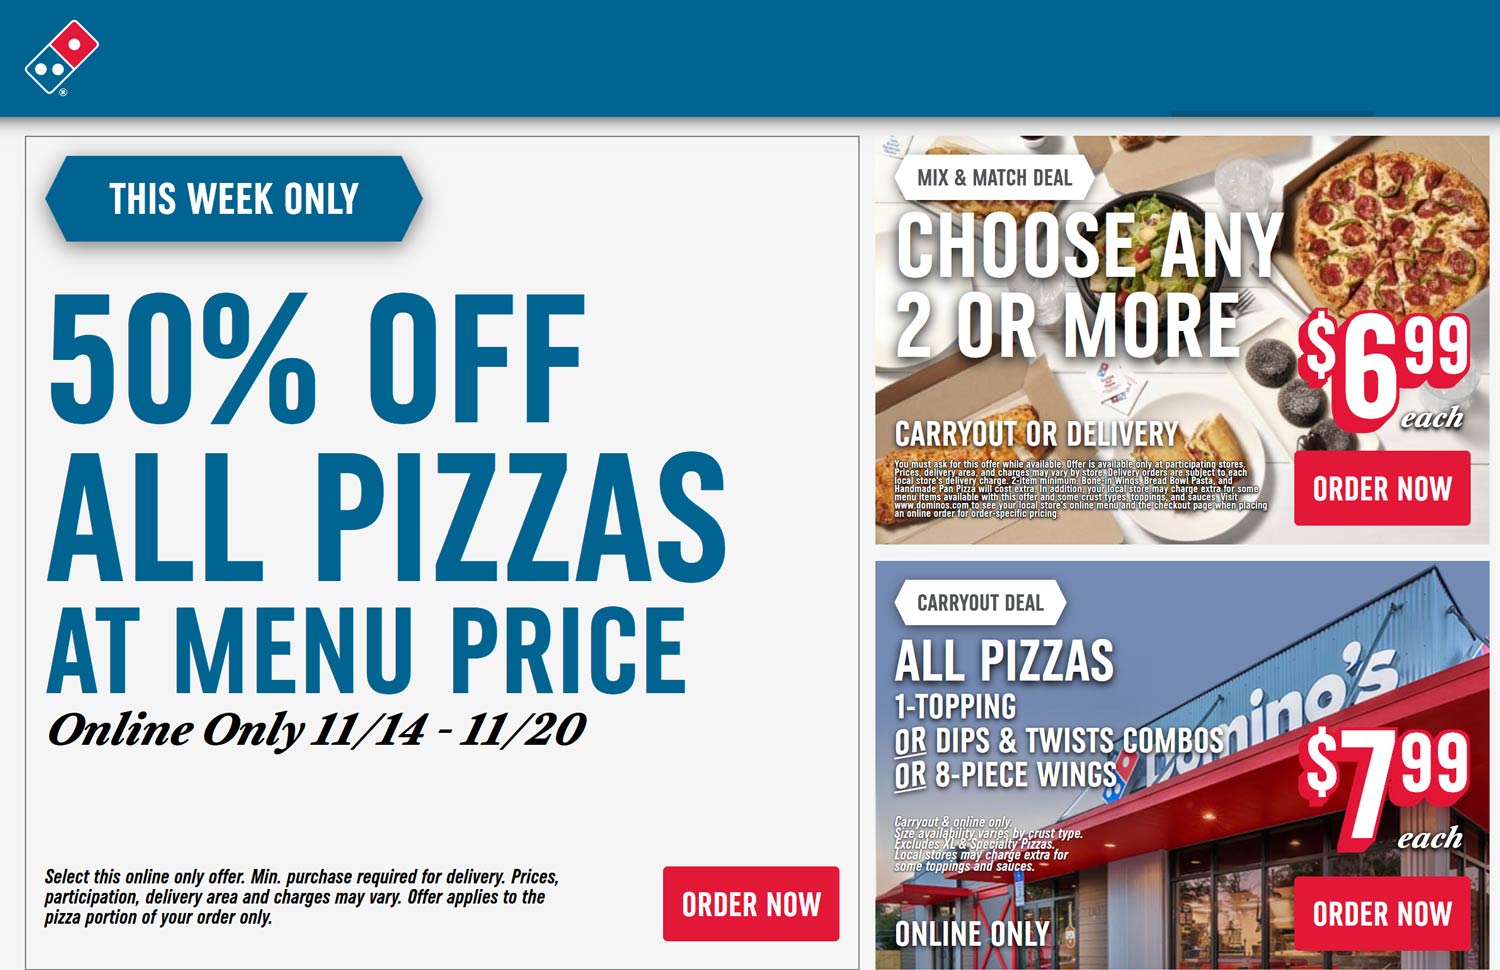 Dominos restaurants Coupon  50% off pizzas online at Dominos #dominos 